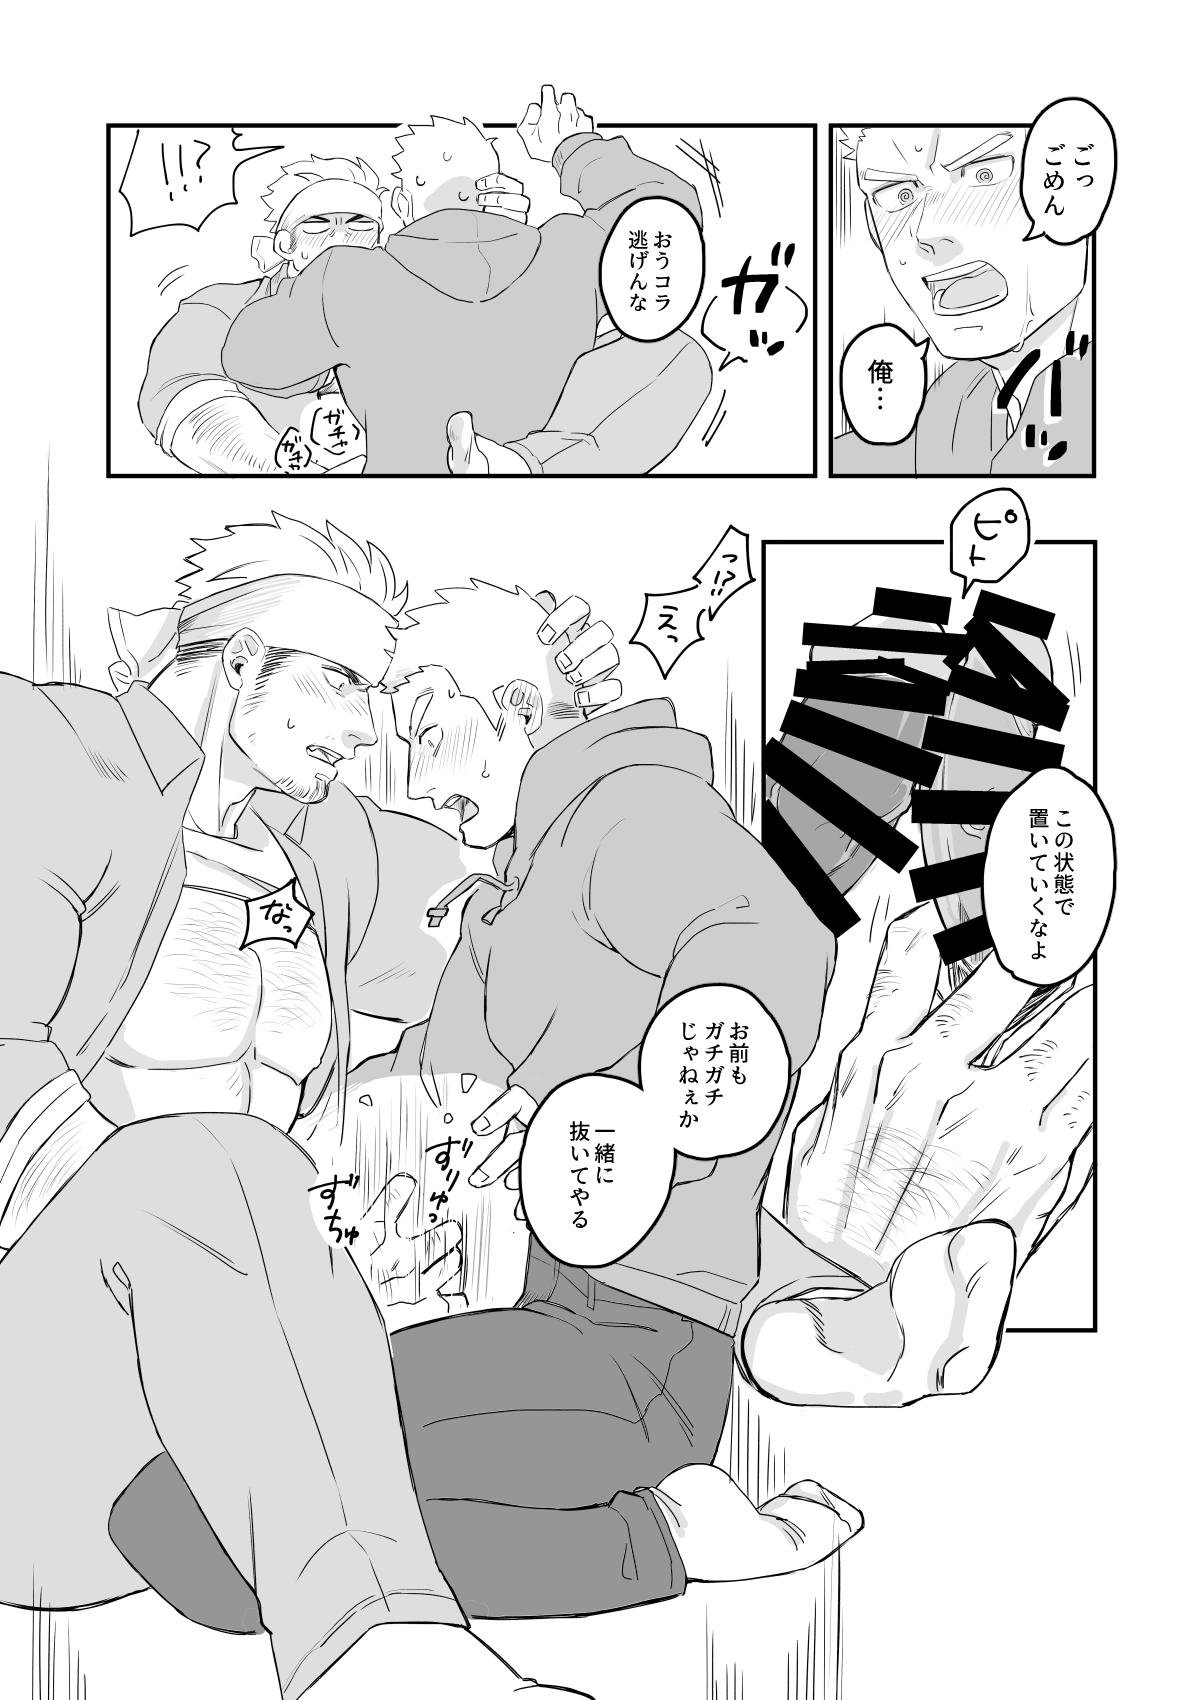 Outdoor ごめんねおじさん - Sorry uncle - Original Cum Swallowing - Page 6